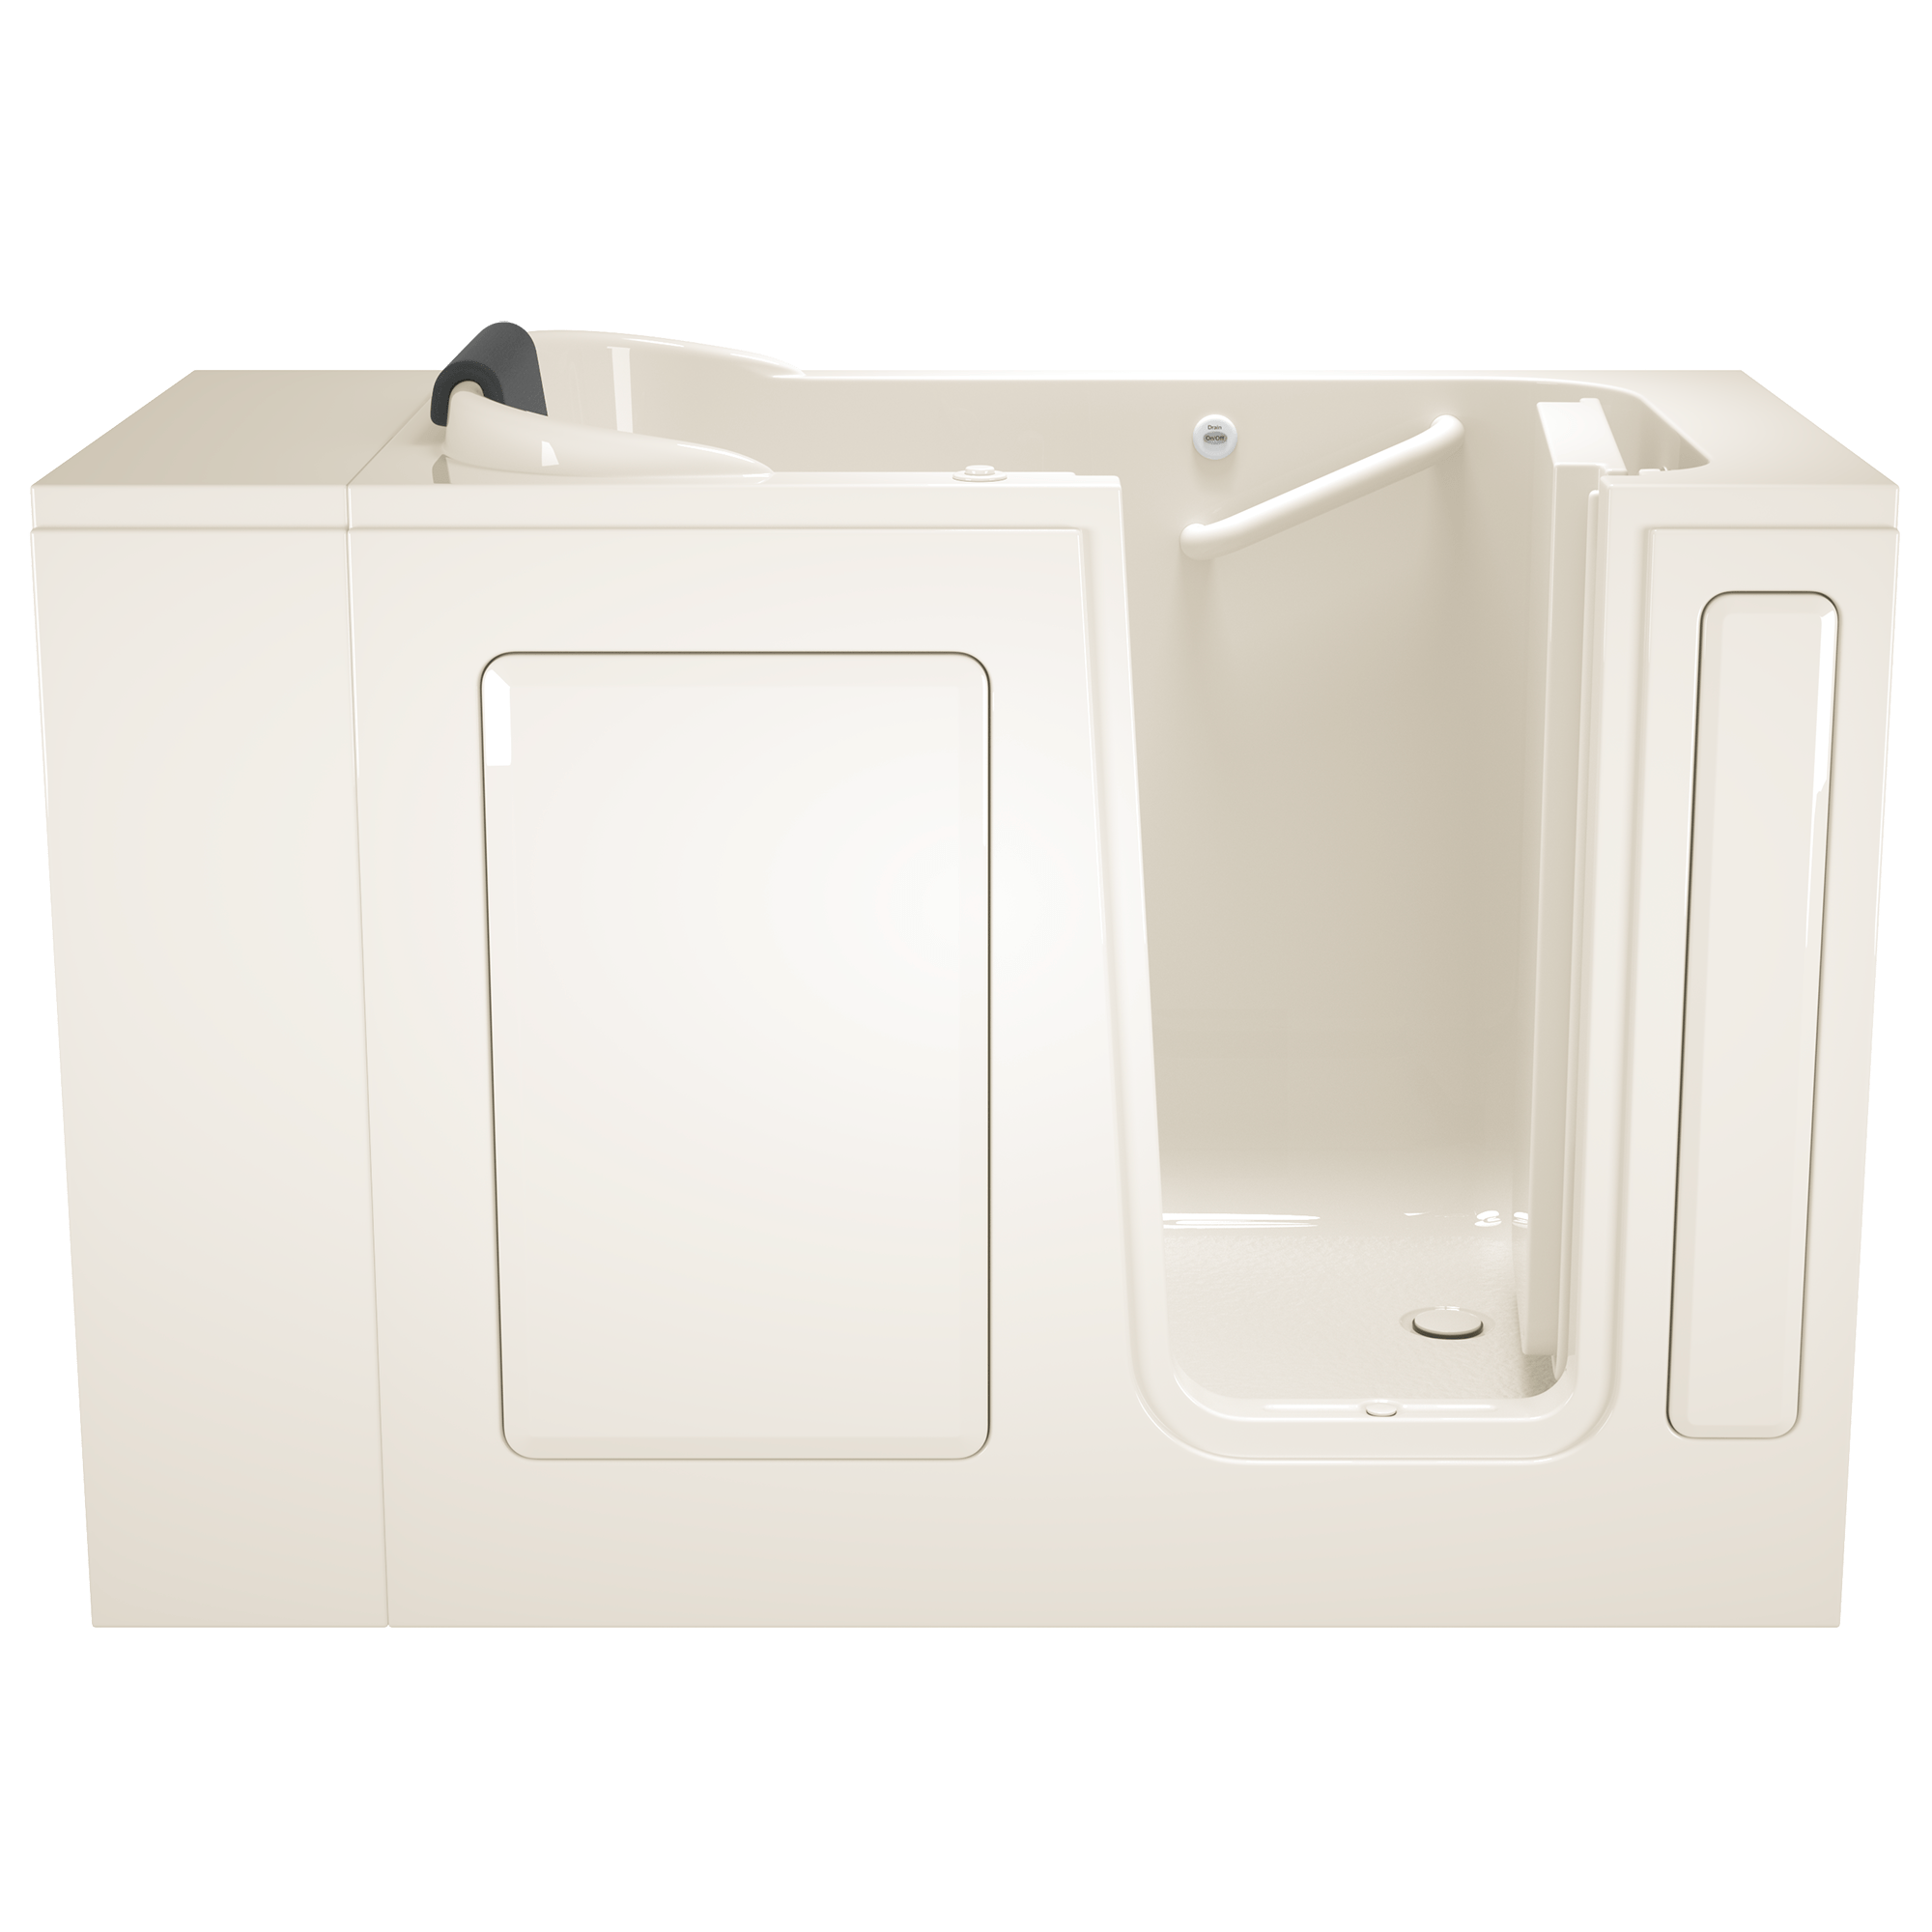 Gelcoat Premium Series 28 x 48-Inch Walk-in Tub With Whirlpool System - Right-Hand Drain